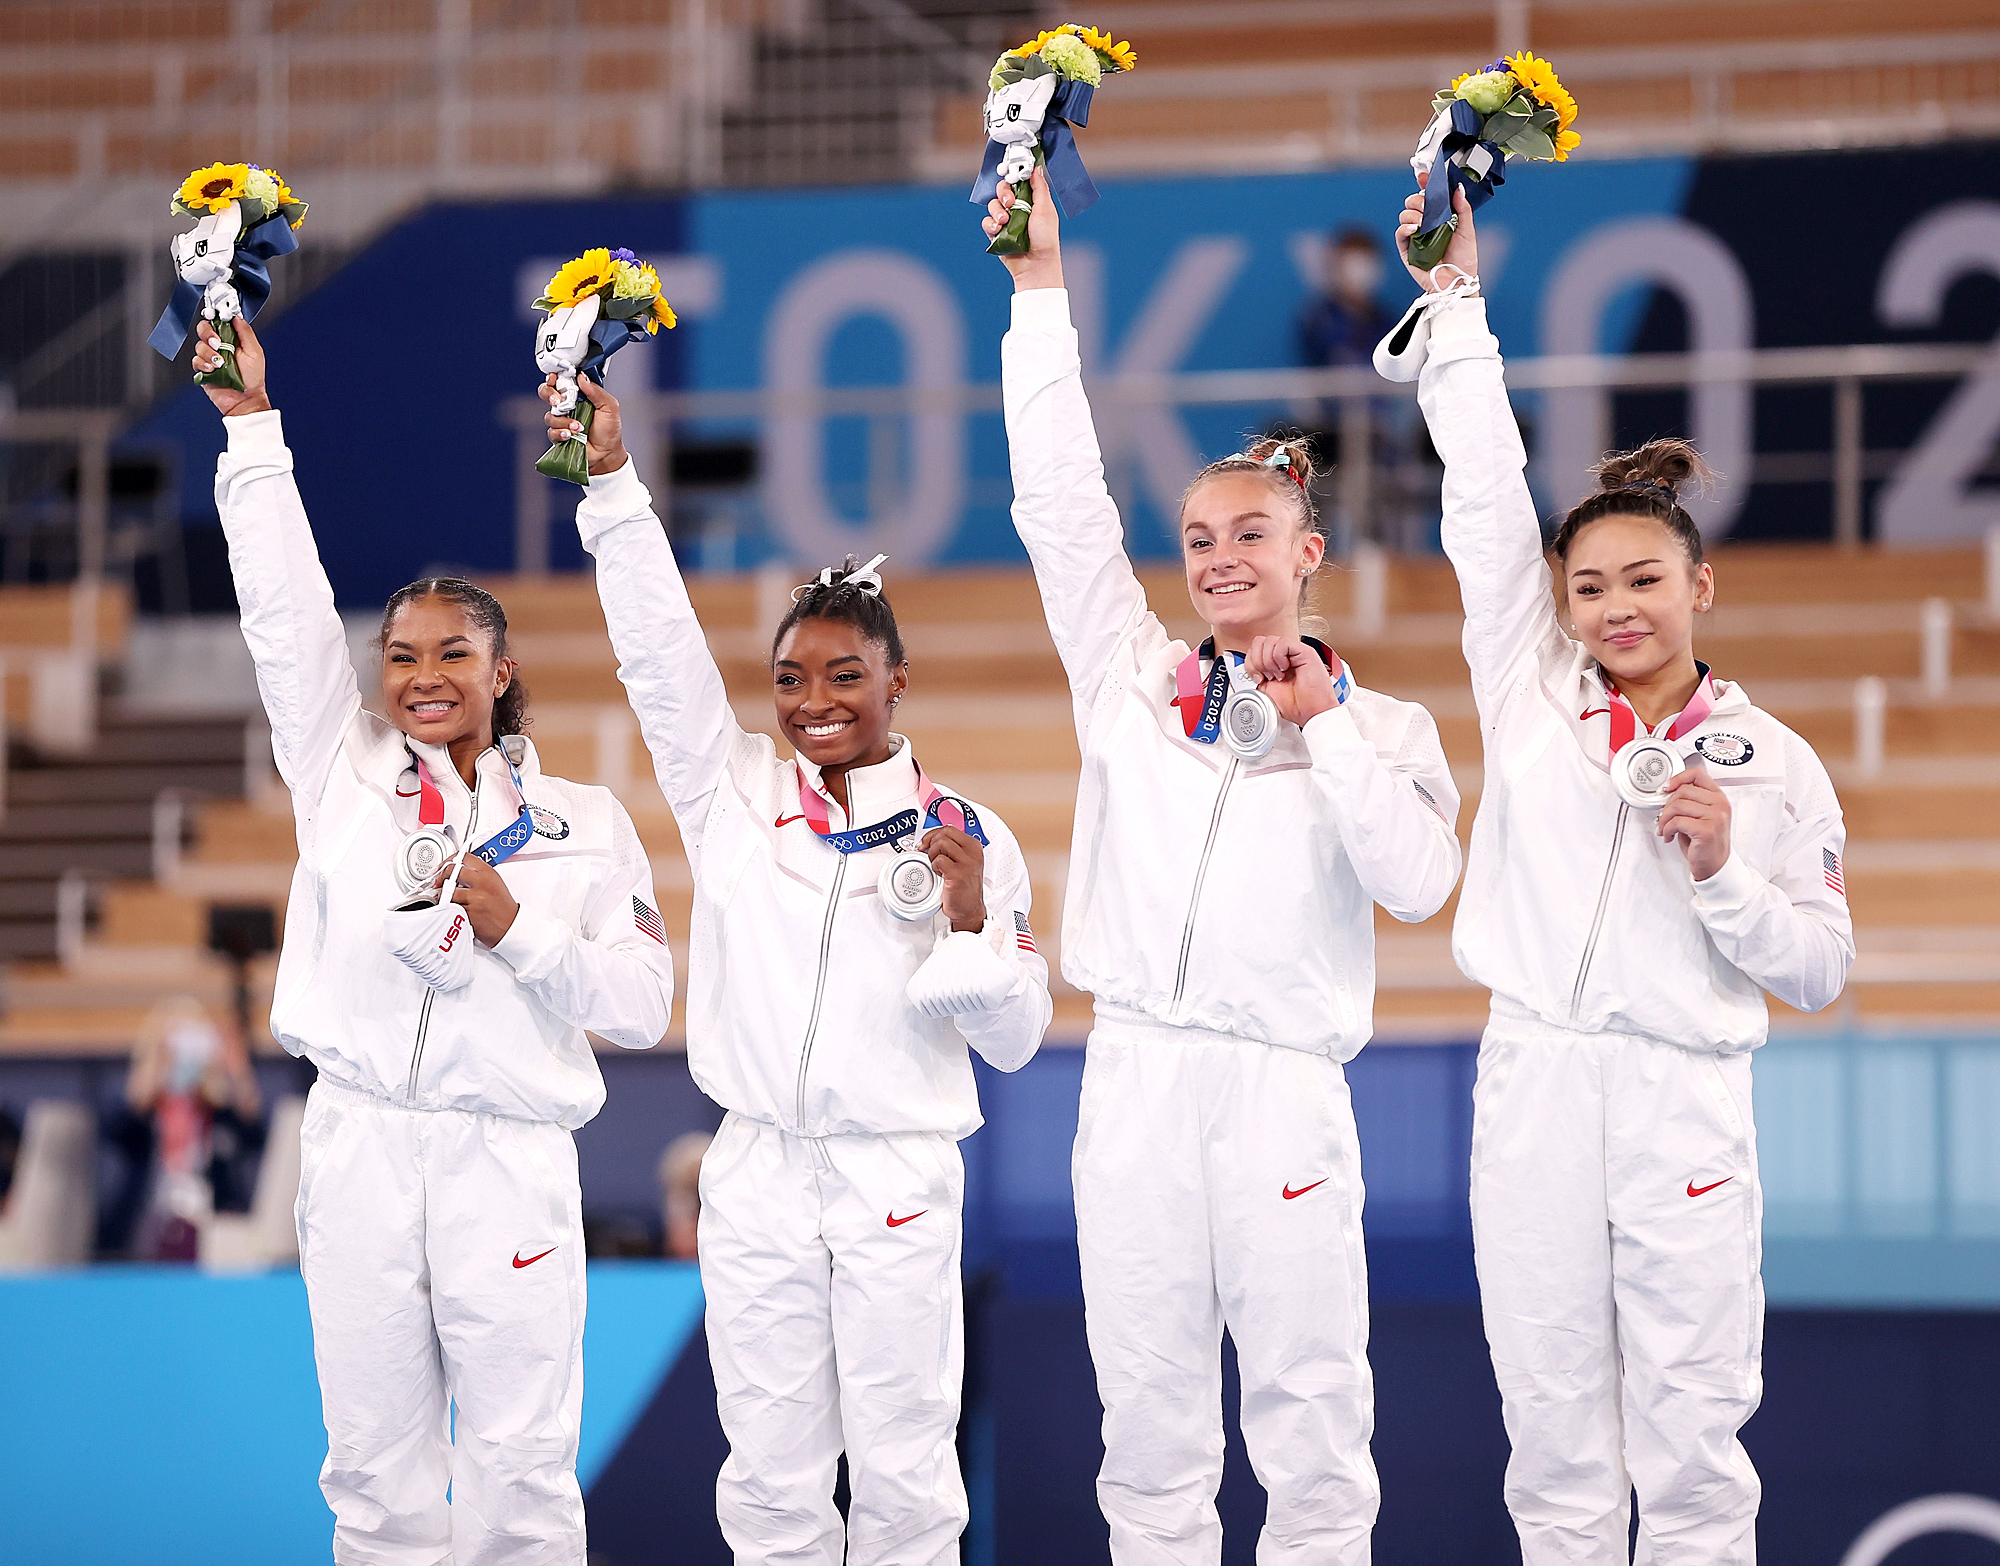 Simone Biles Celebrates Team's Medal After Tokyo Olympics Exit